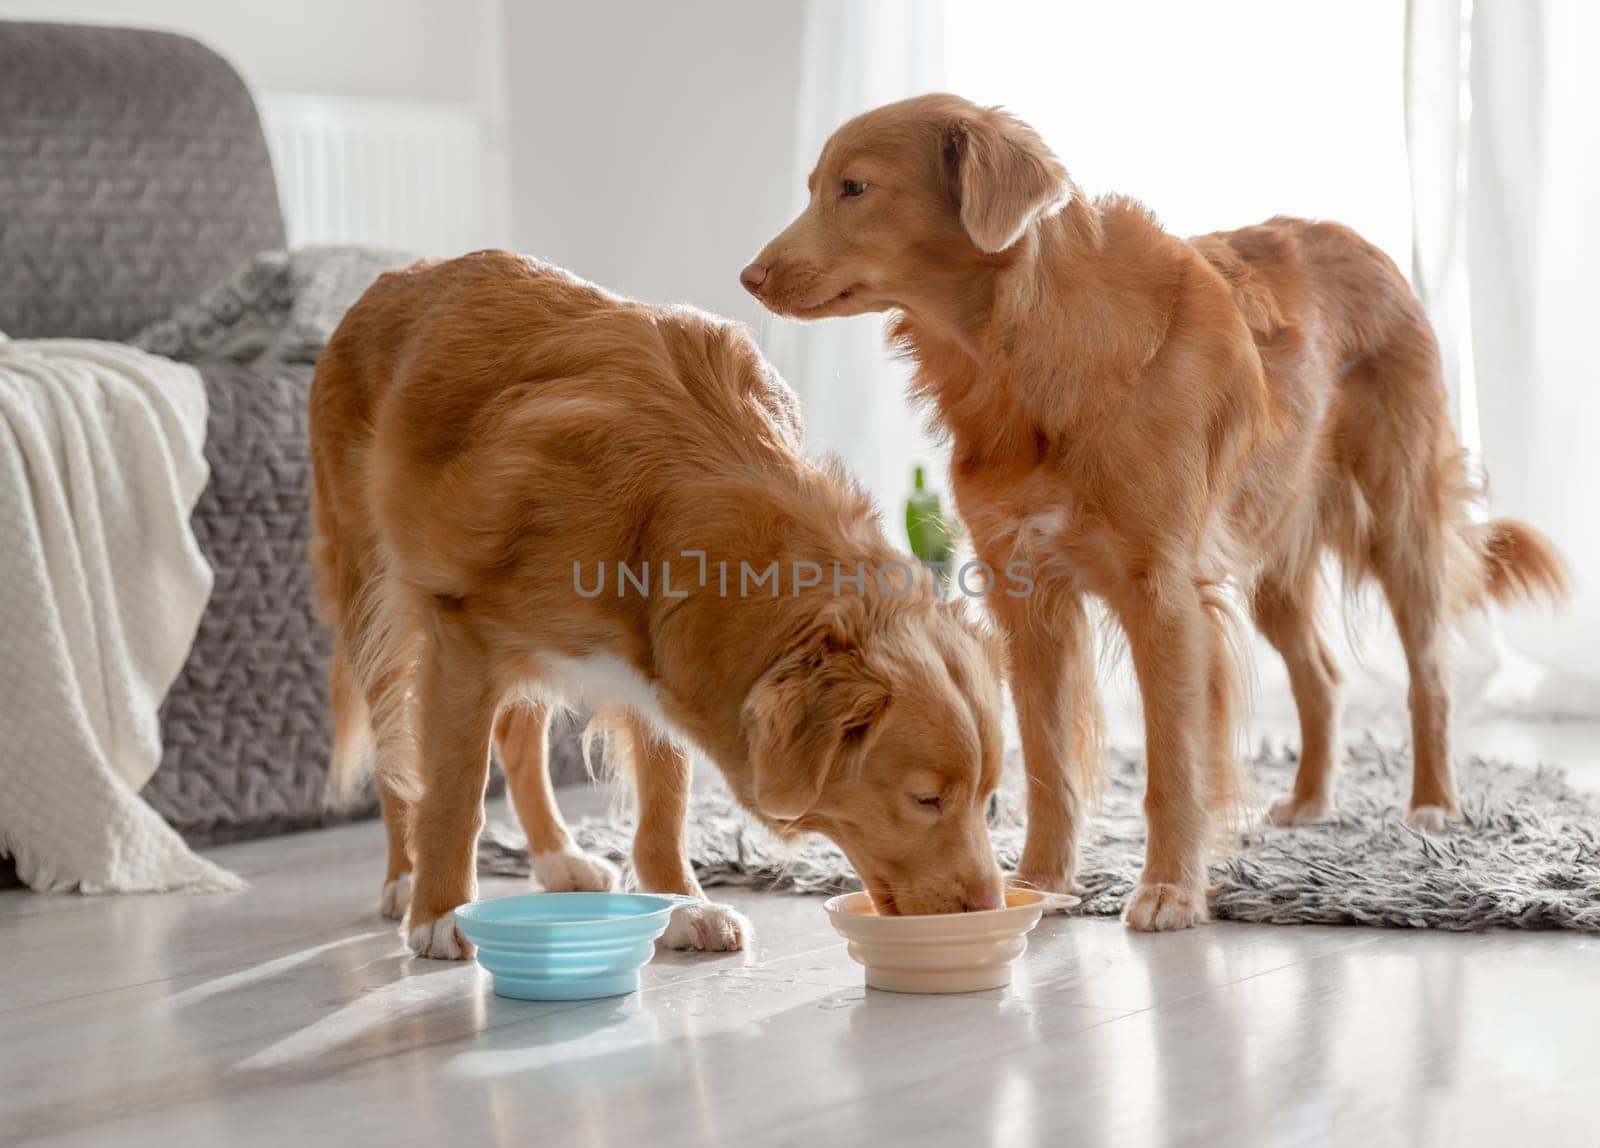 Two Nova Scotia Retrievers Drinking From Bowls At Home by tan4ikk1